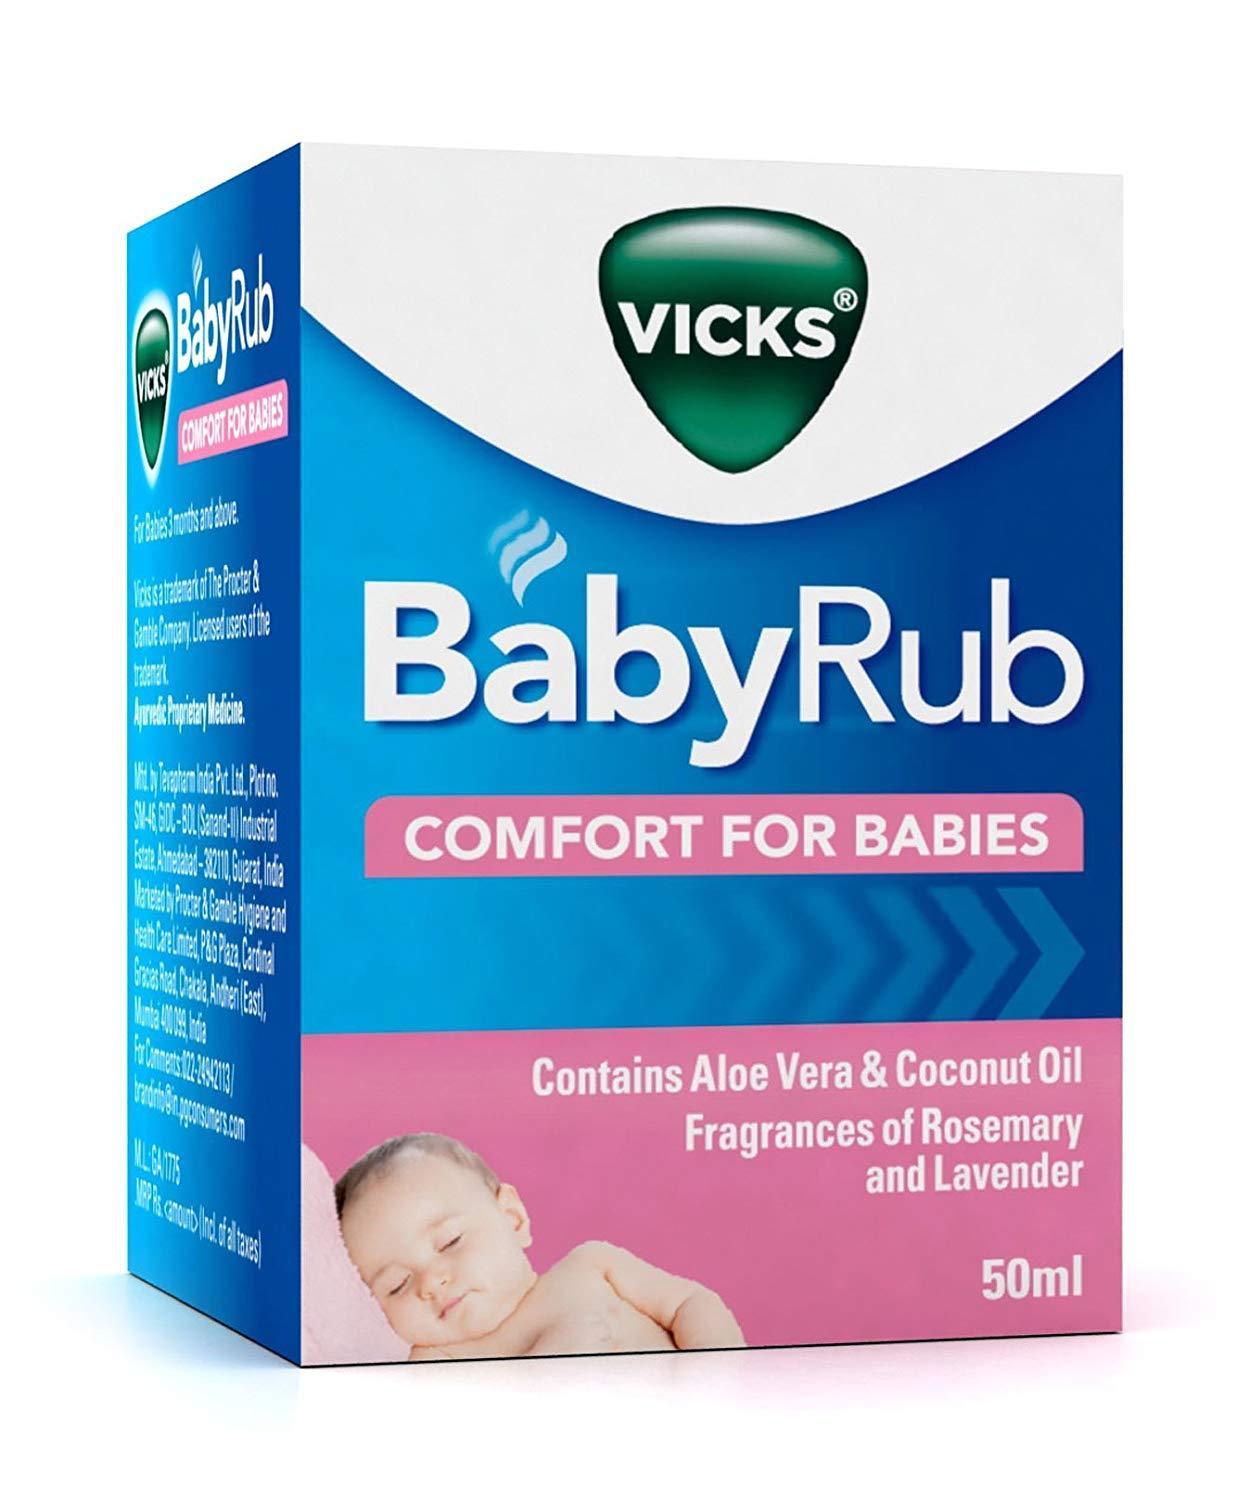 Buy Vicks Baby Rub Comport For Babies in Delhi, India at healthwithherbal